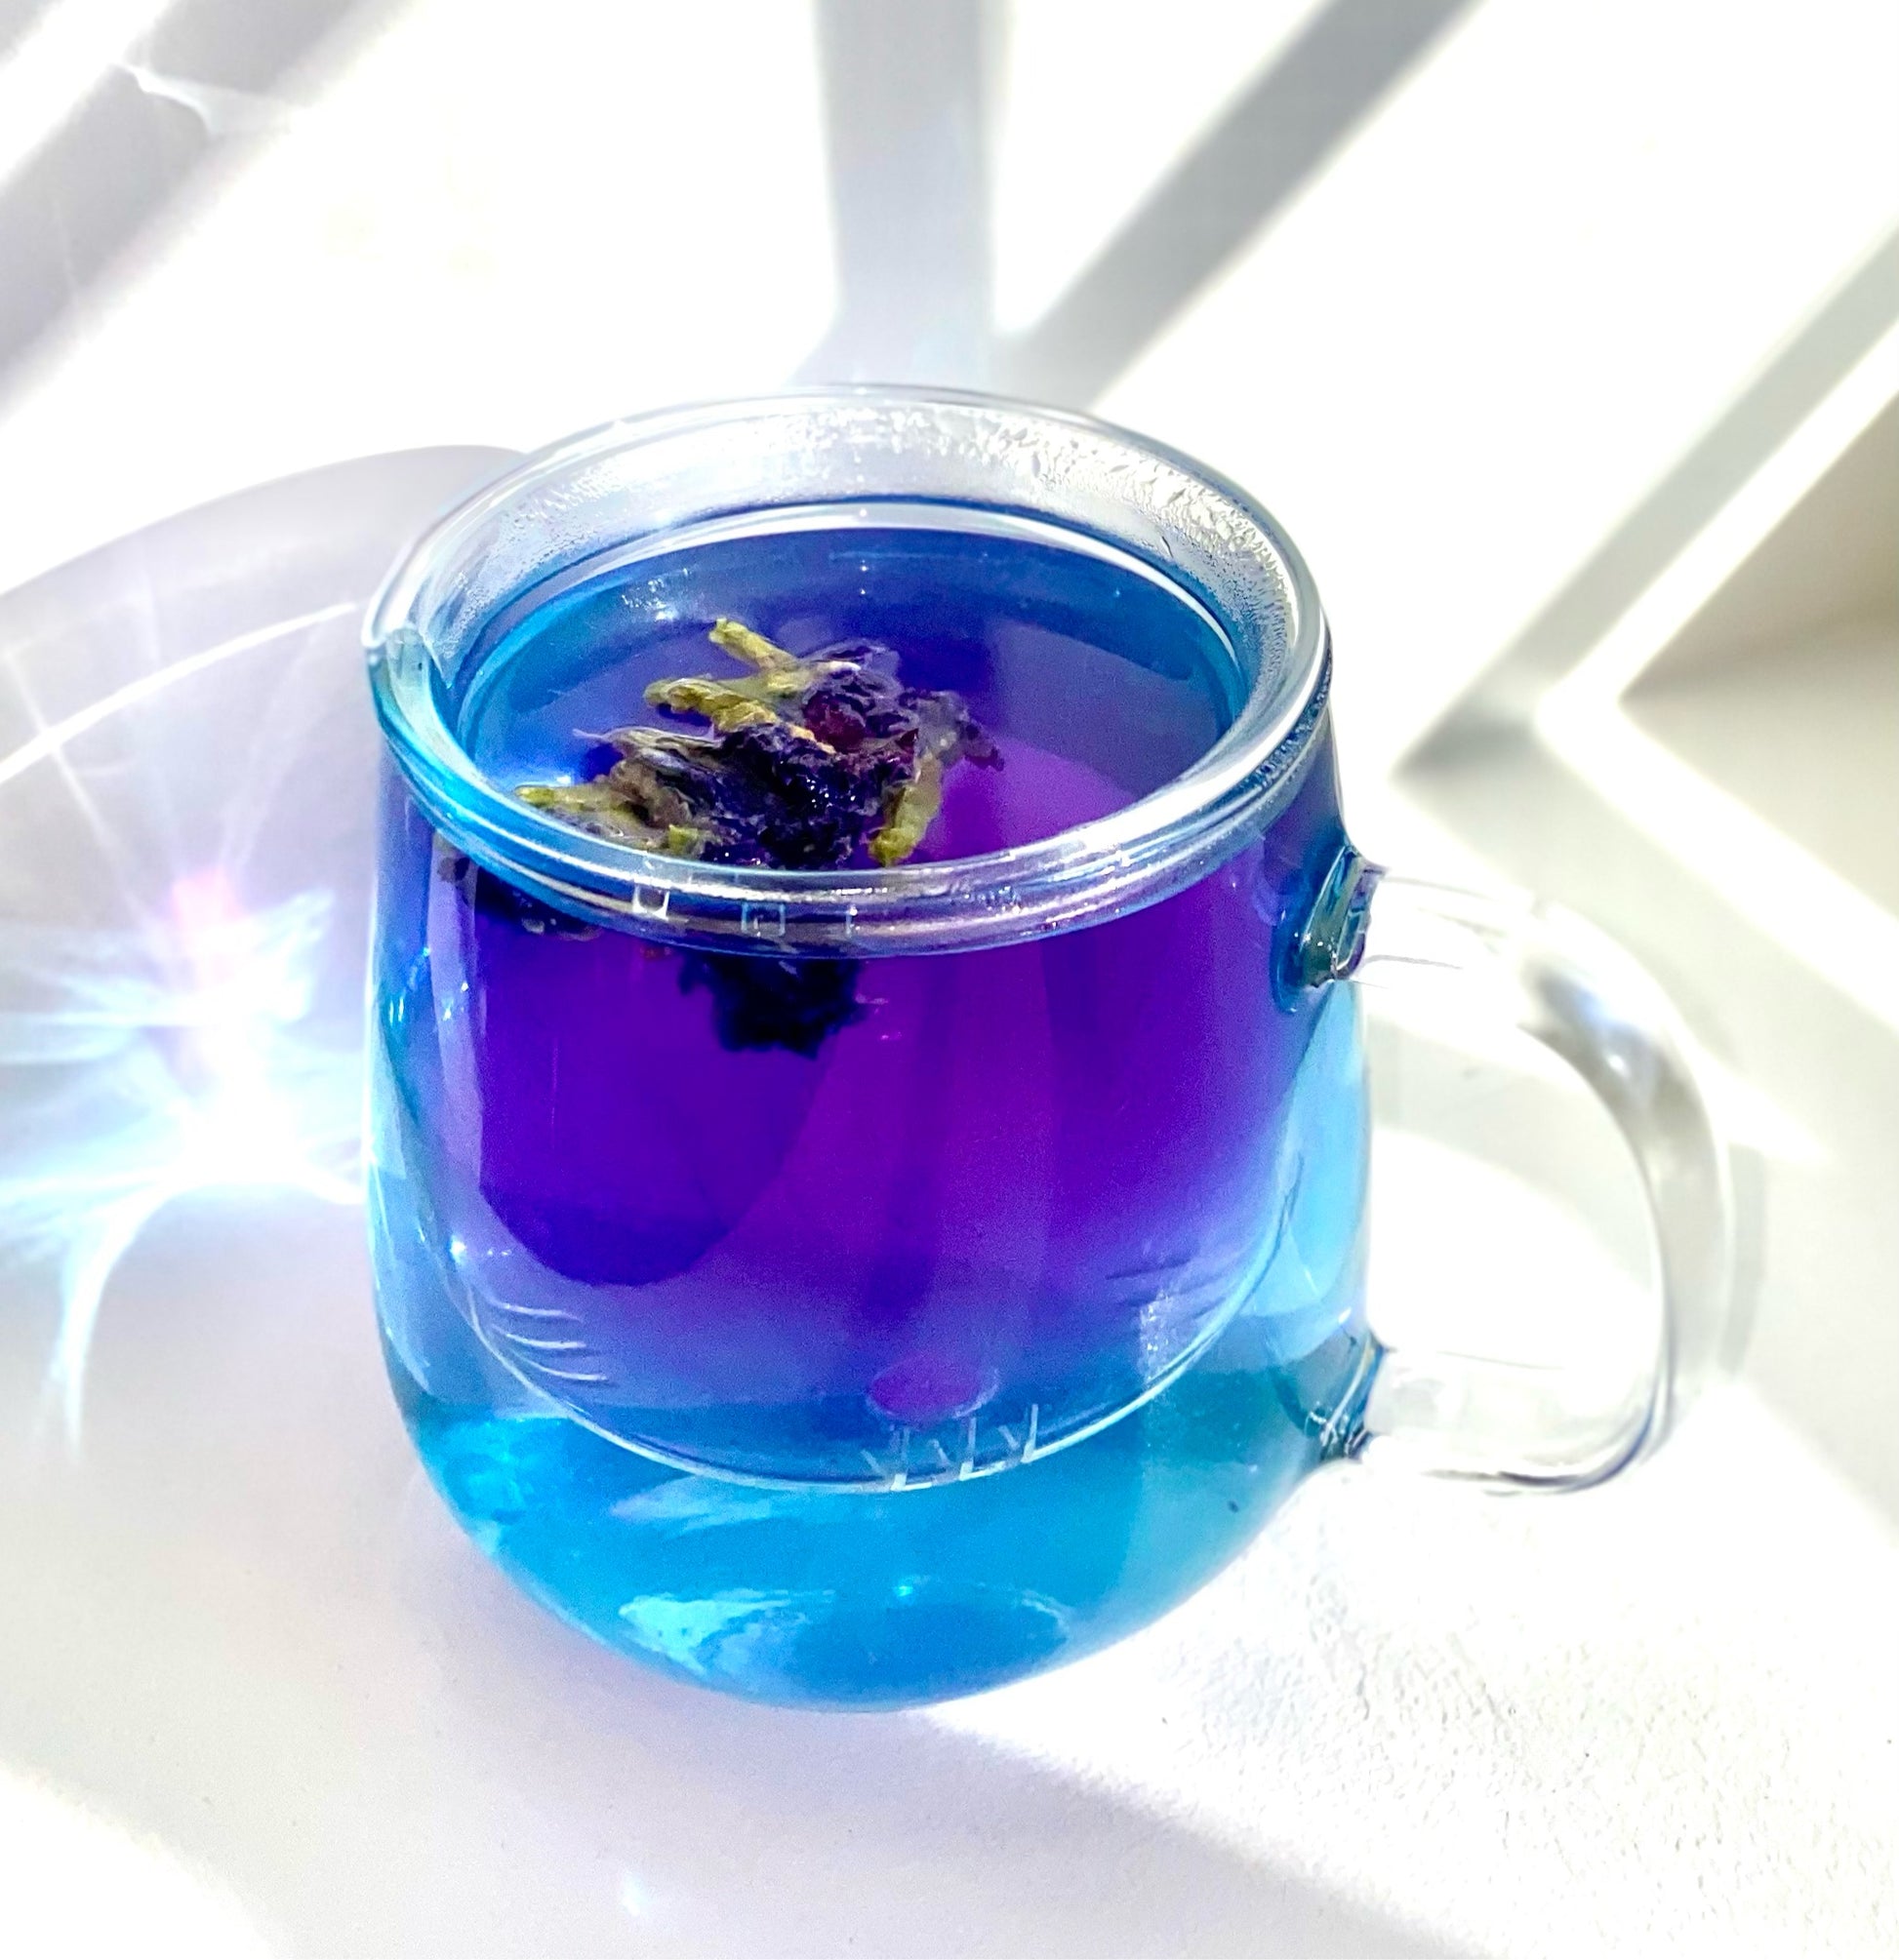 Butterfly Pe Flower Tea turns from blue to purple when you add key limes to it